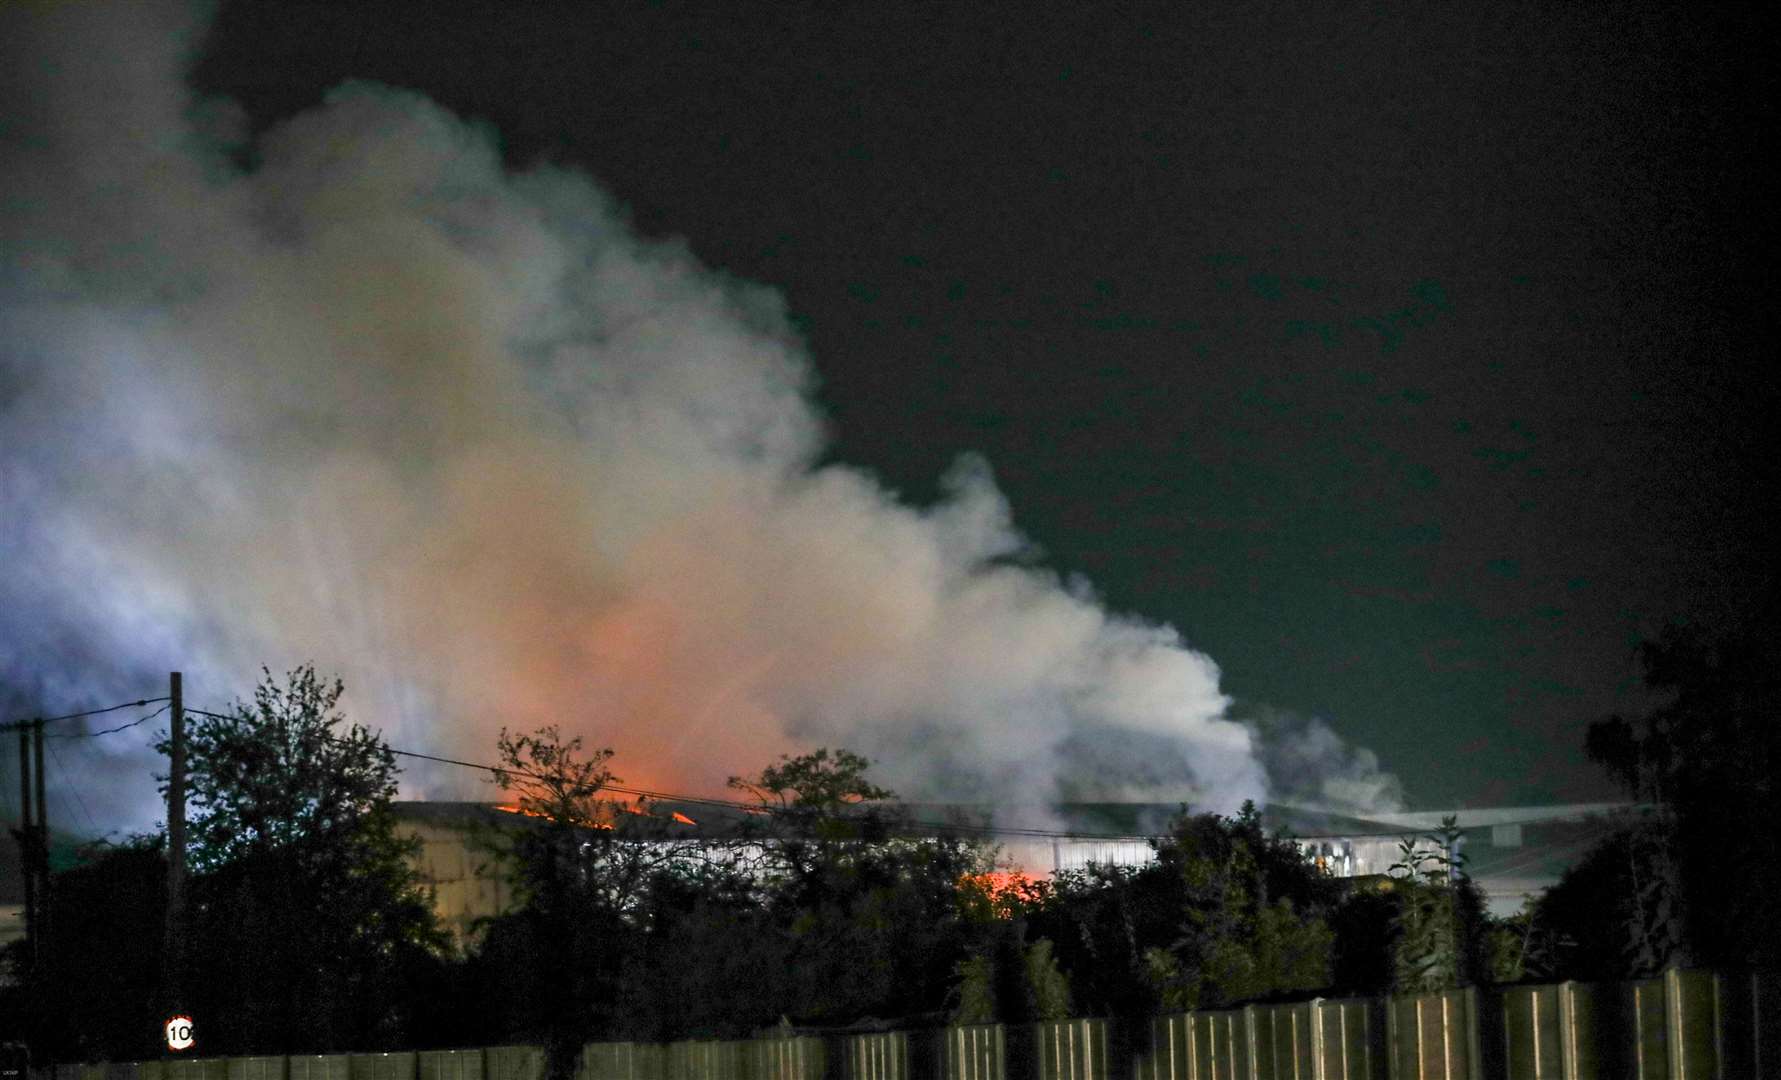 The fire at the Eurolink industrial estate in Sittingbourne. Picture: UKNIP (51604097)